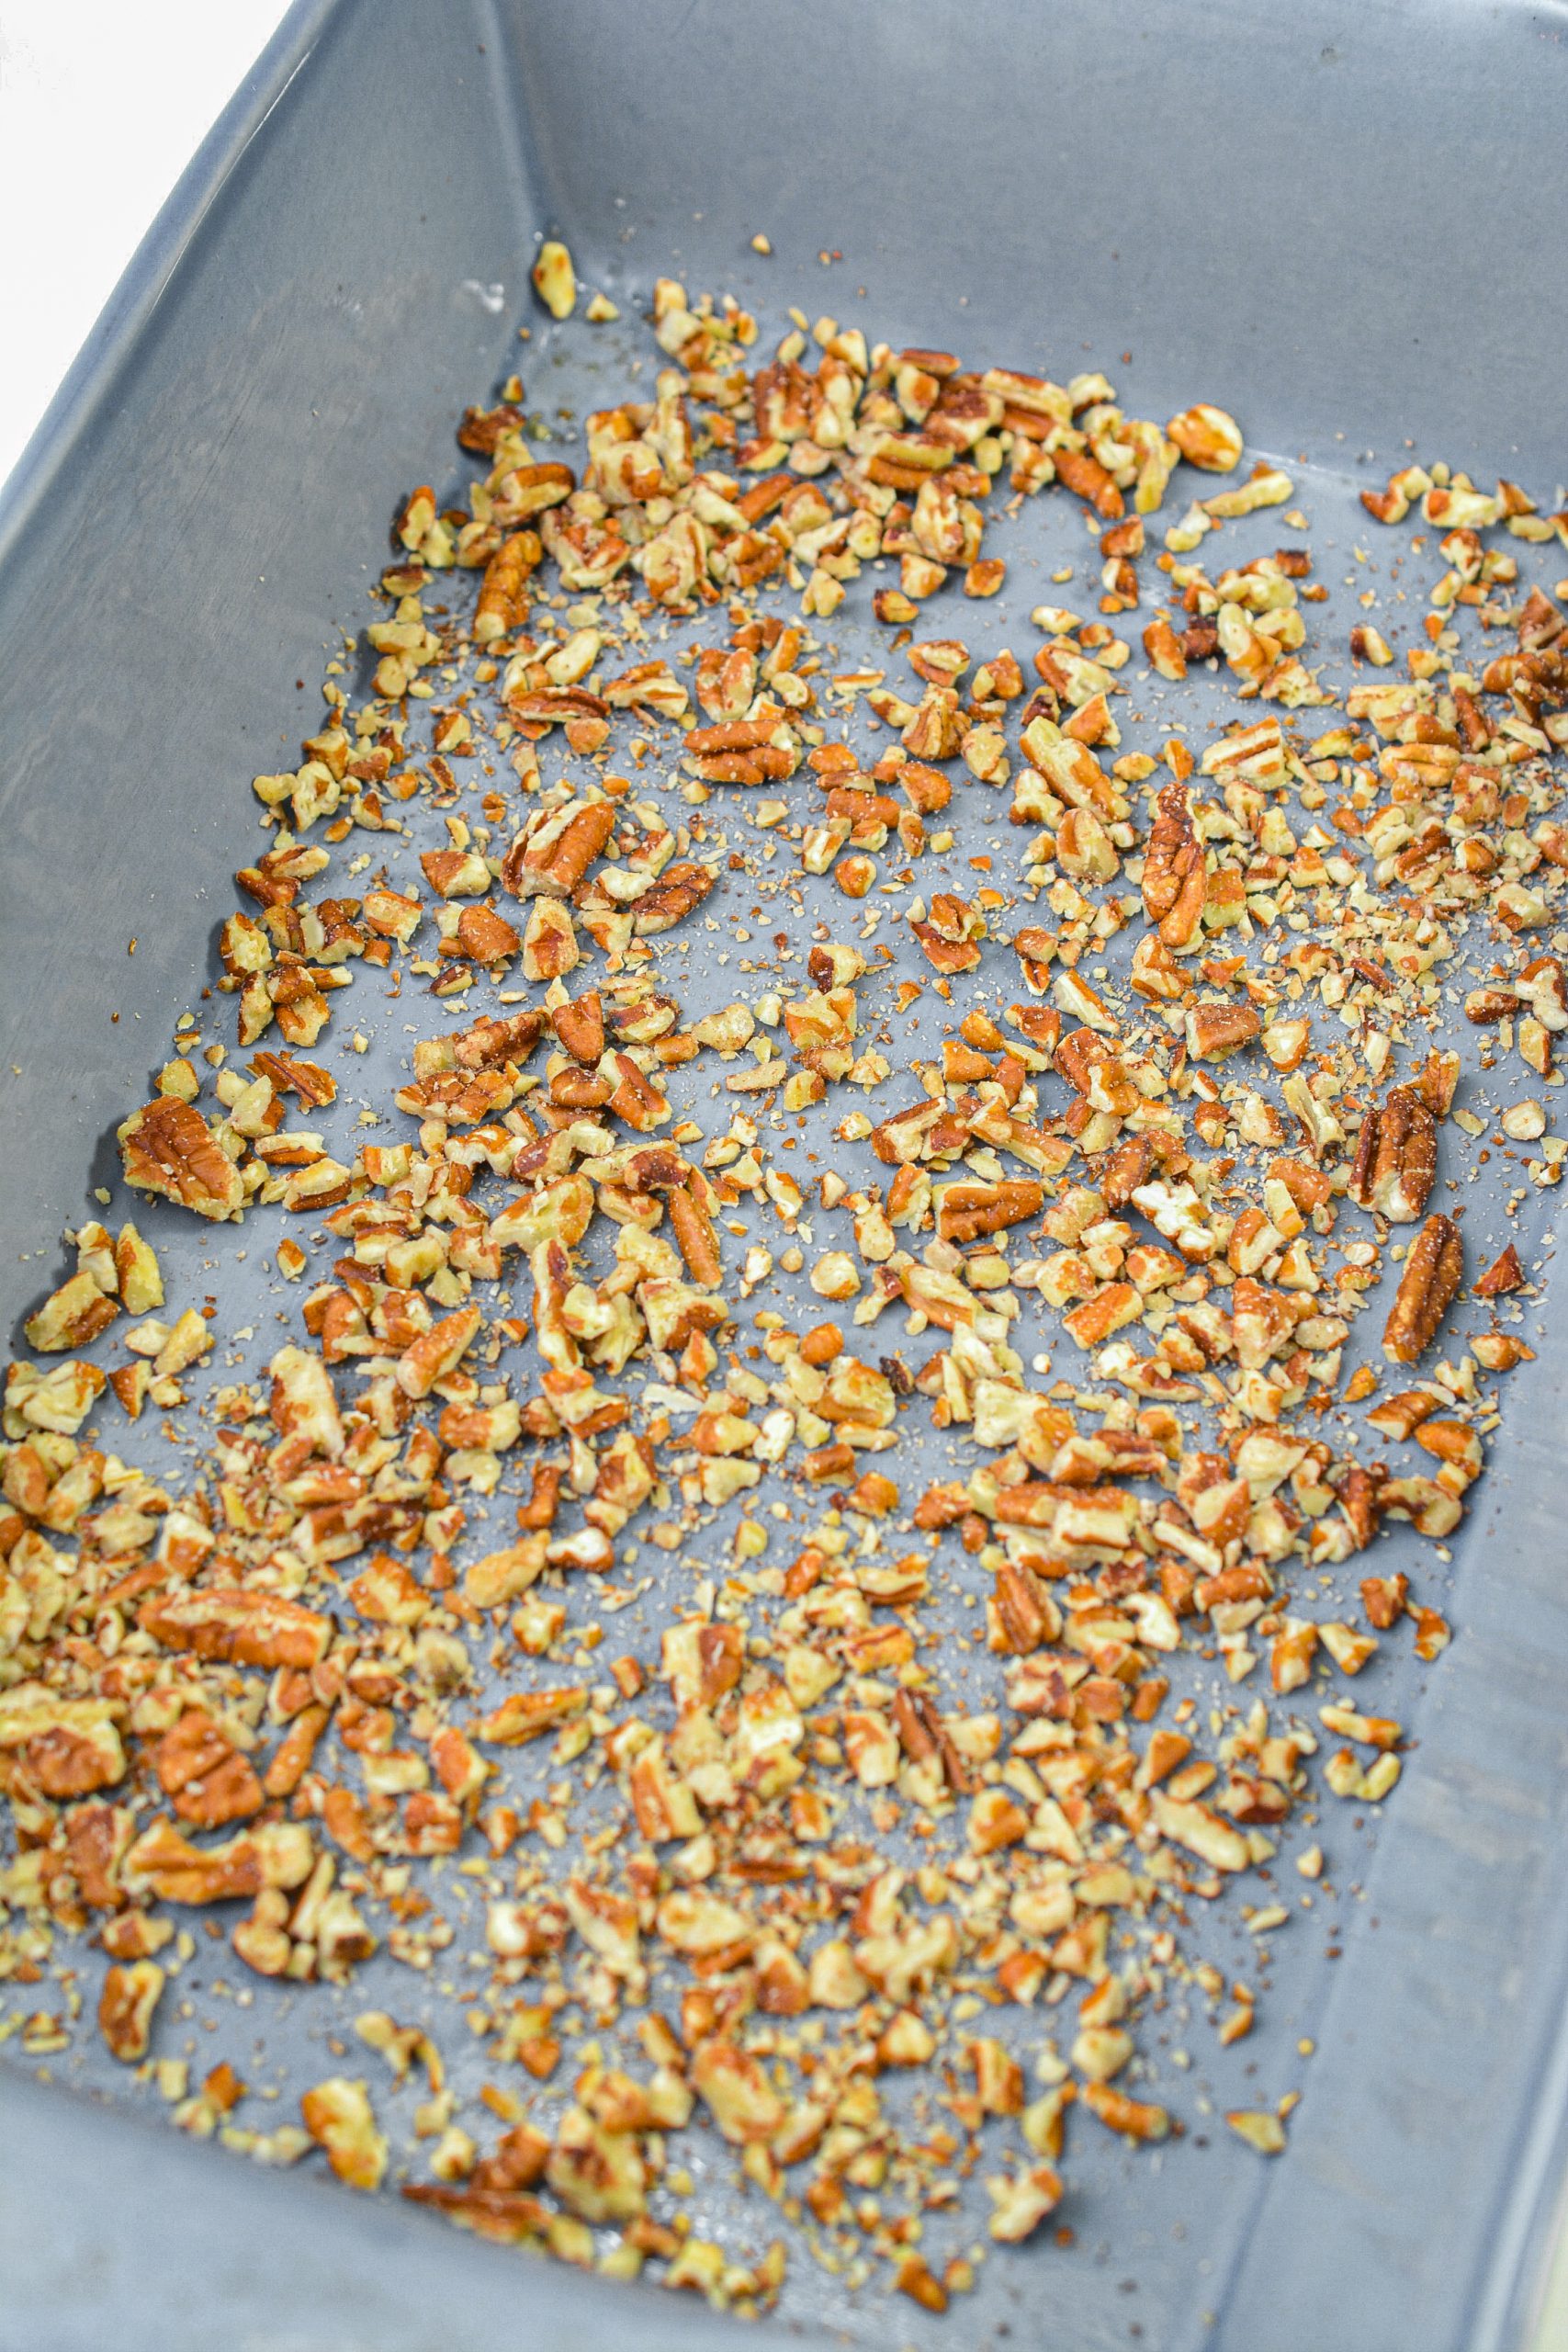 Sprinkle ½ cup of chopped pecans and 1 ½ cups of shredded coconut in the bottom of a well-greased casserole dish.